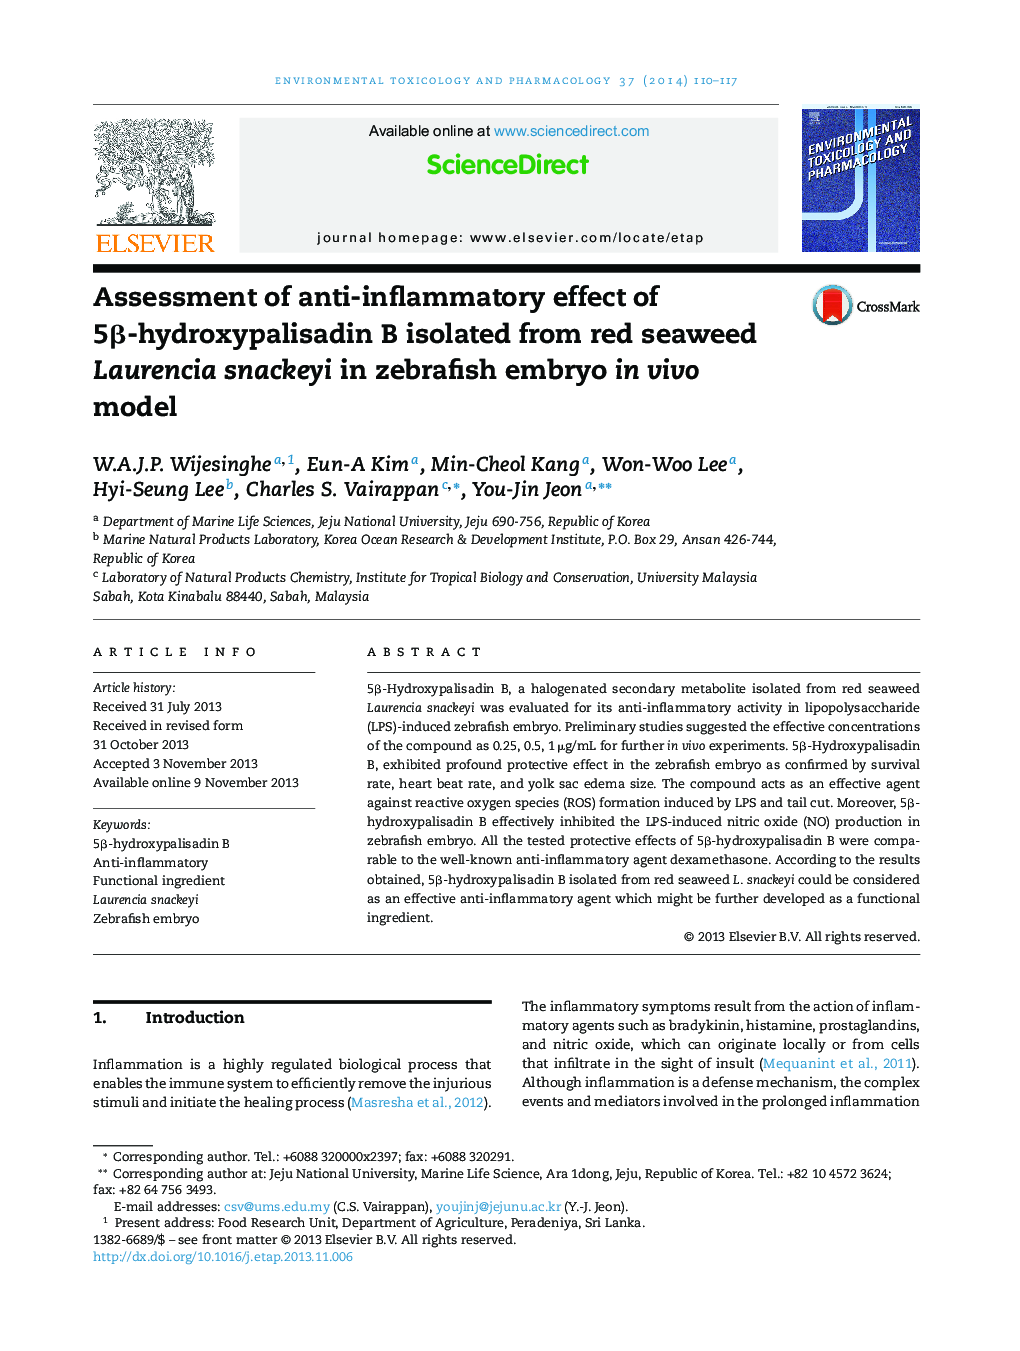 Assessment of anti-inflammatory effect of 5β-hydroxypalisadin B isolated from red seaweed Laurencia snackeyi in zebrafish embryo in vivo model